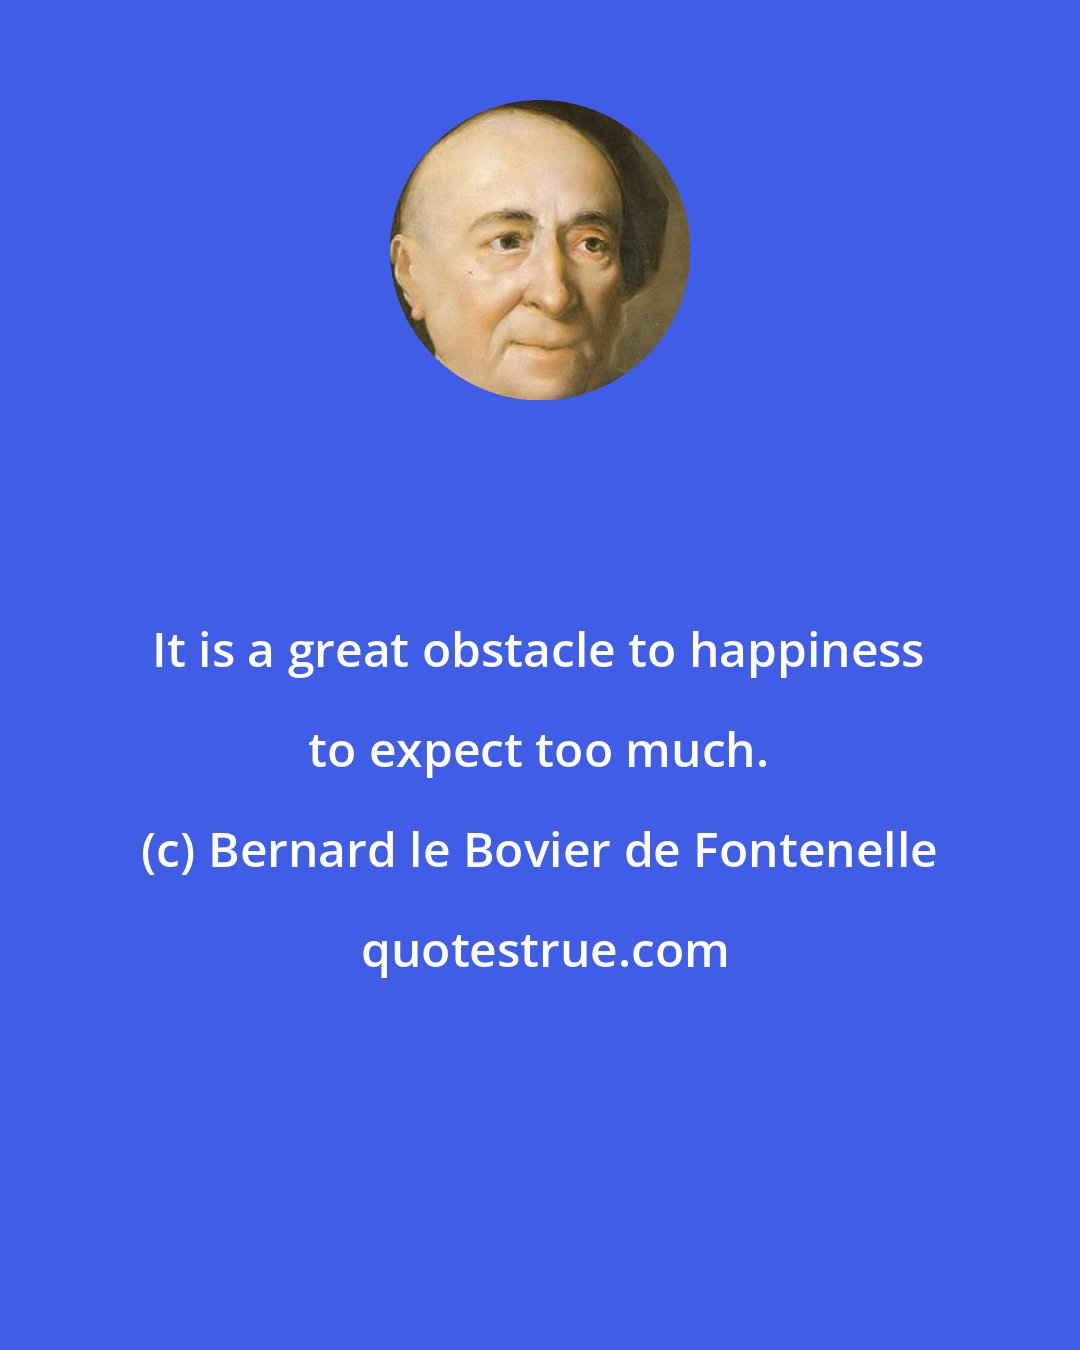 Bernard le Bovier de Fontenelle: It is a great obstacle to happiness to expect too much.